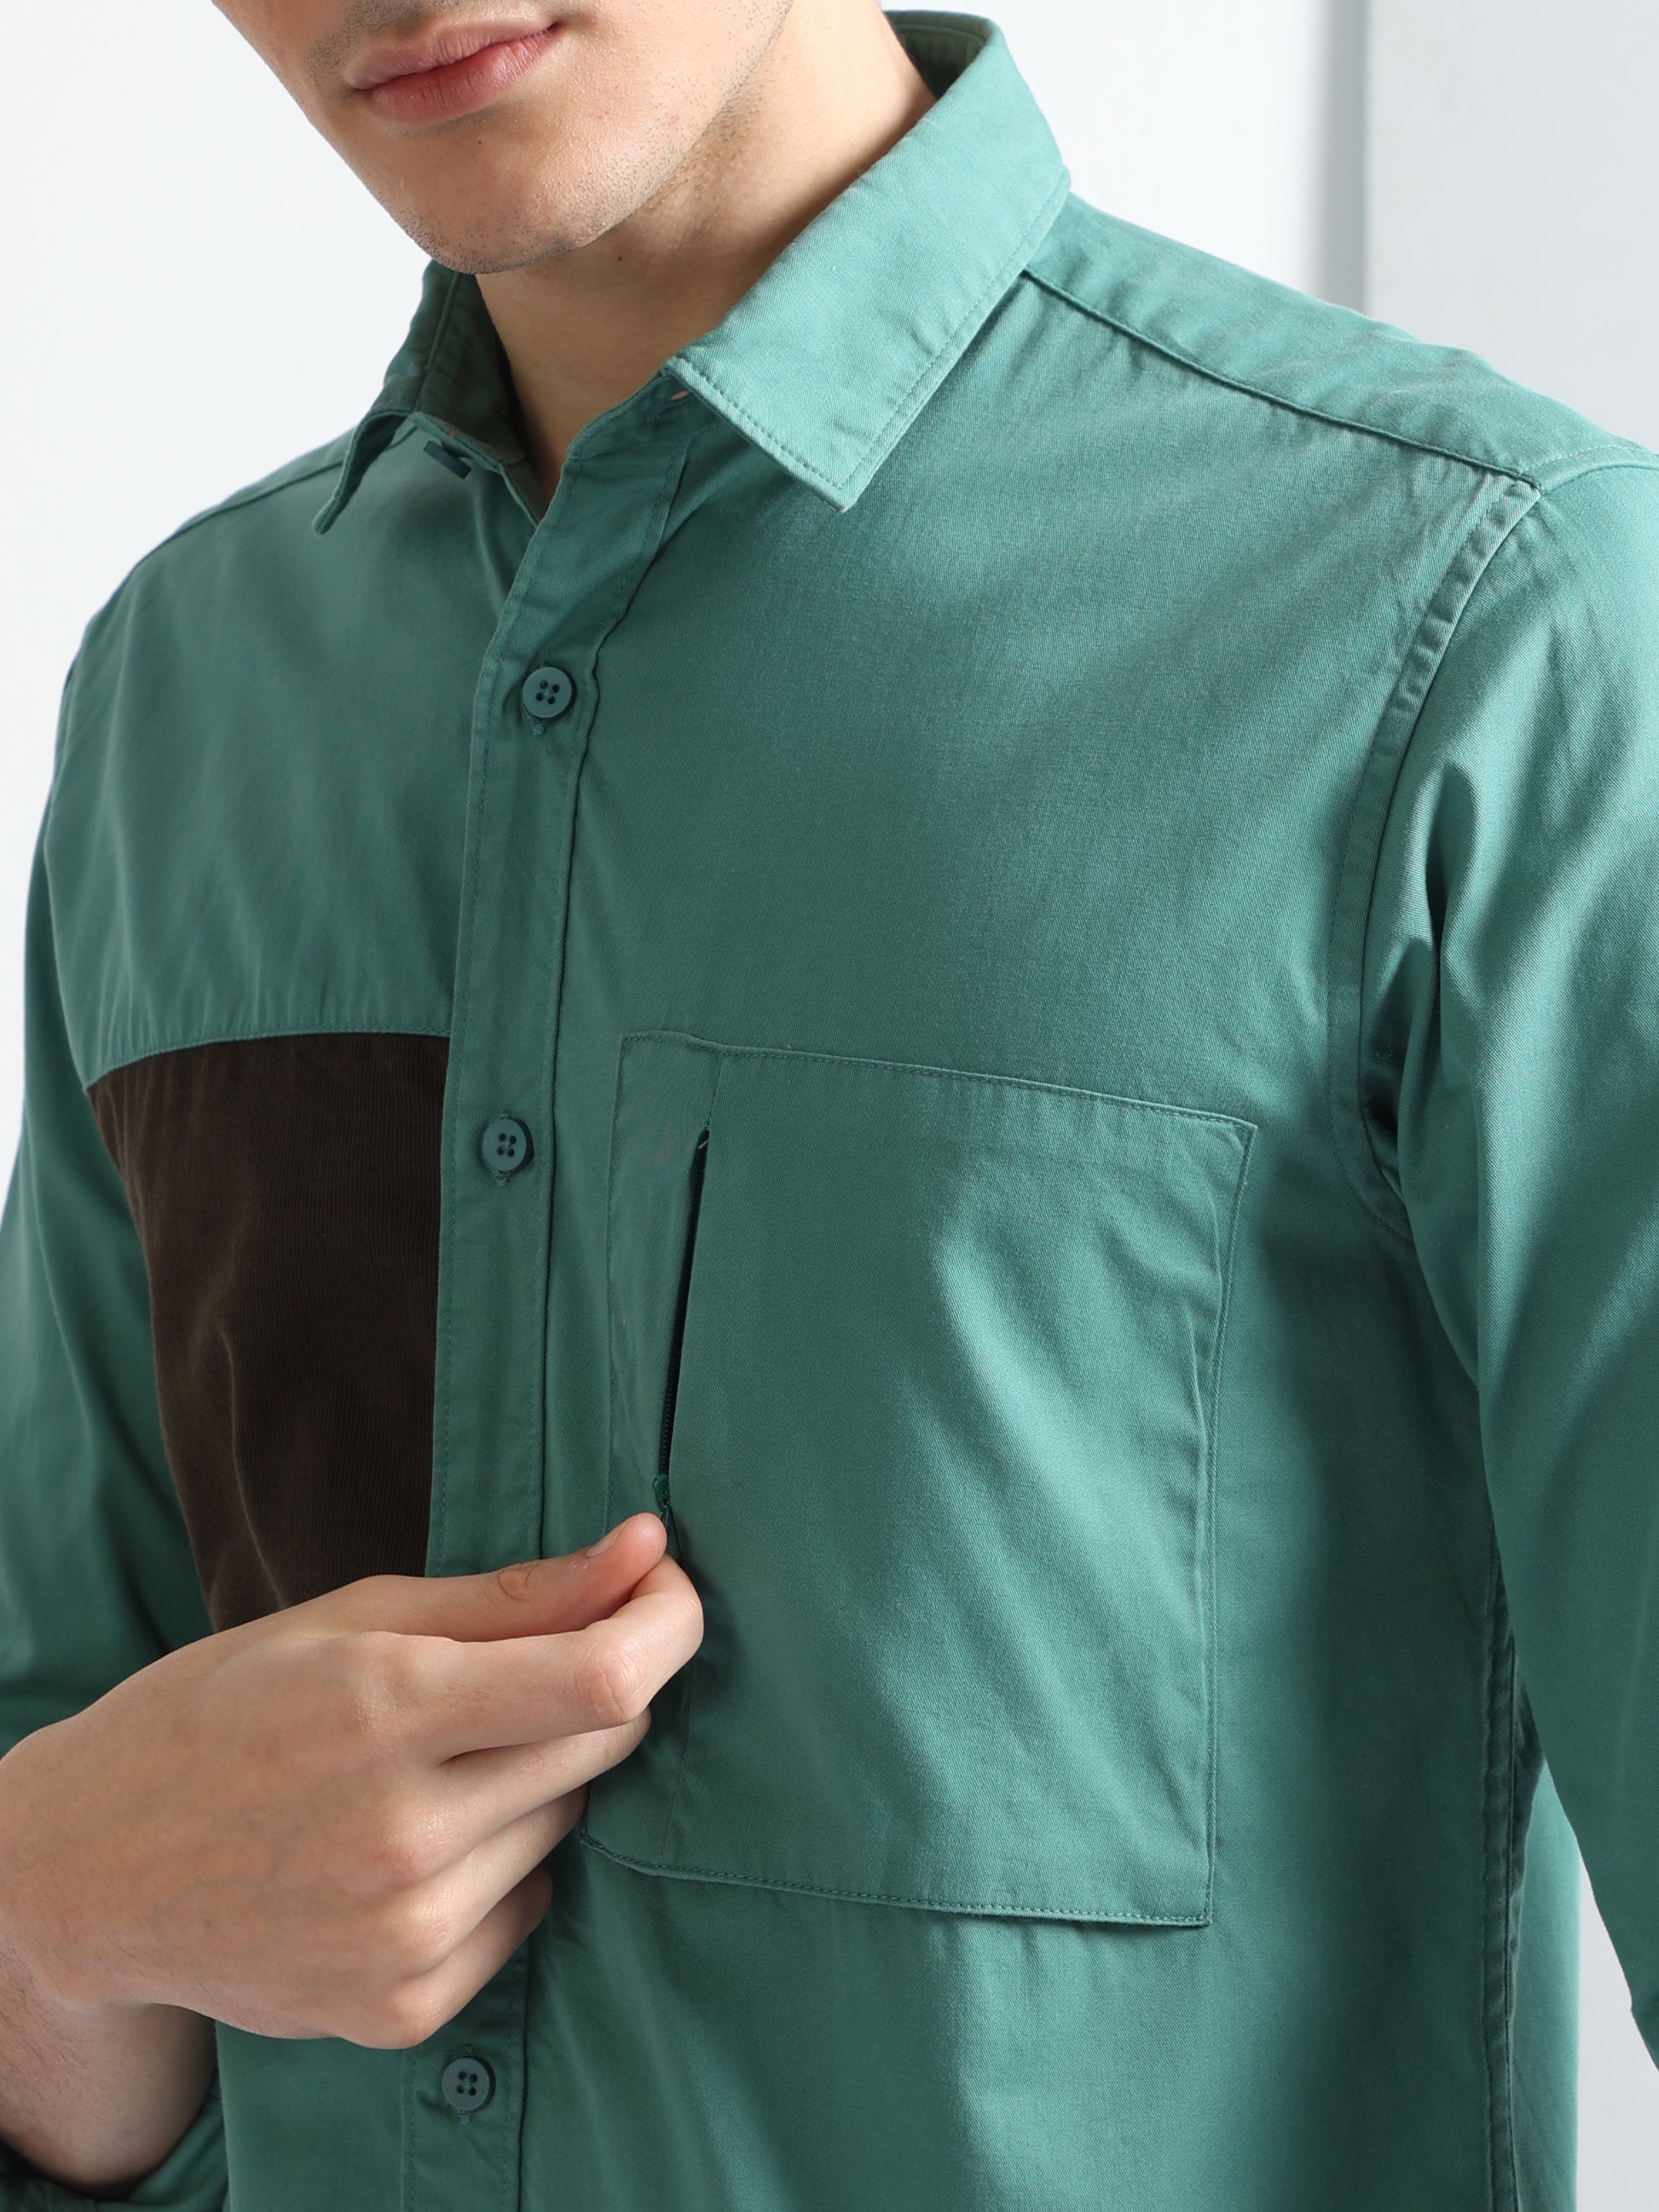 Buy Cut And Sew Single Pocket Smart Casual Shirt Online.